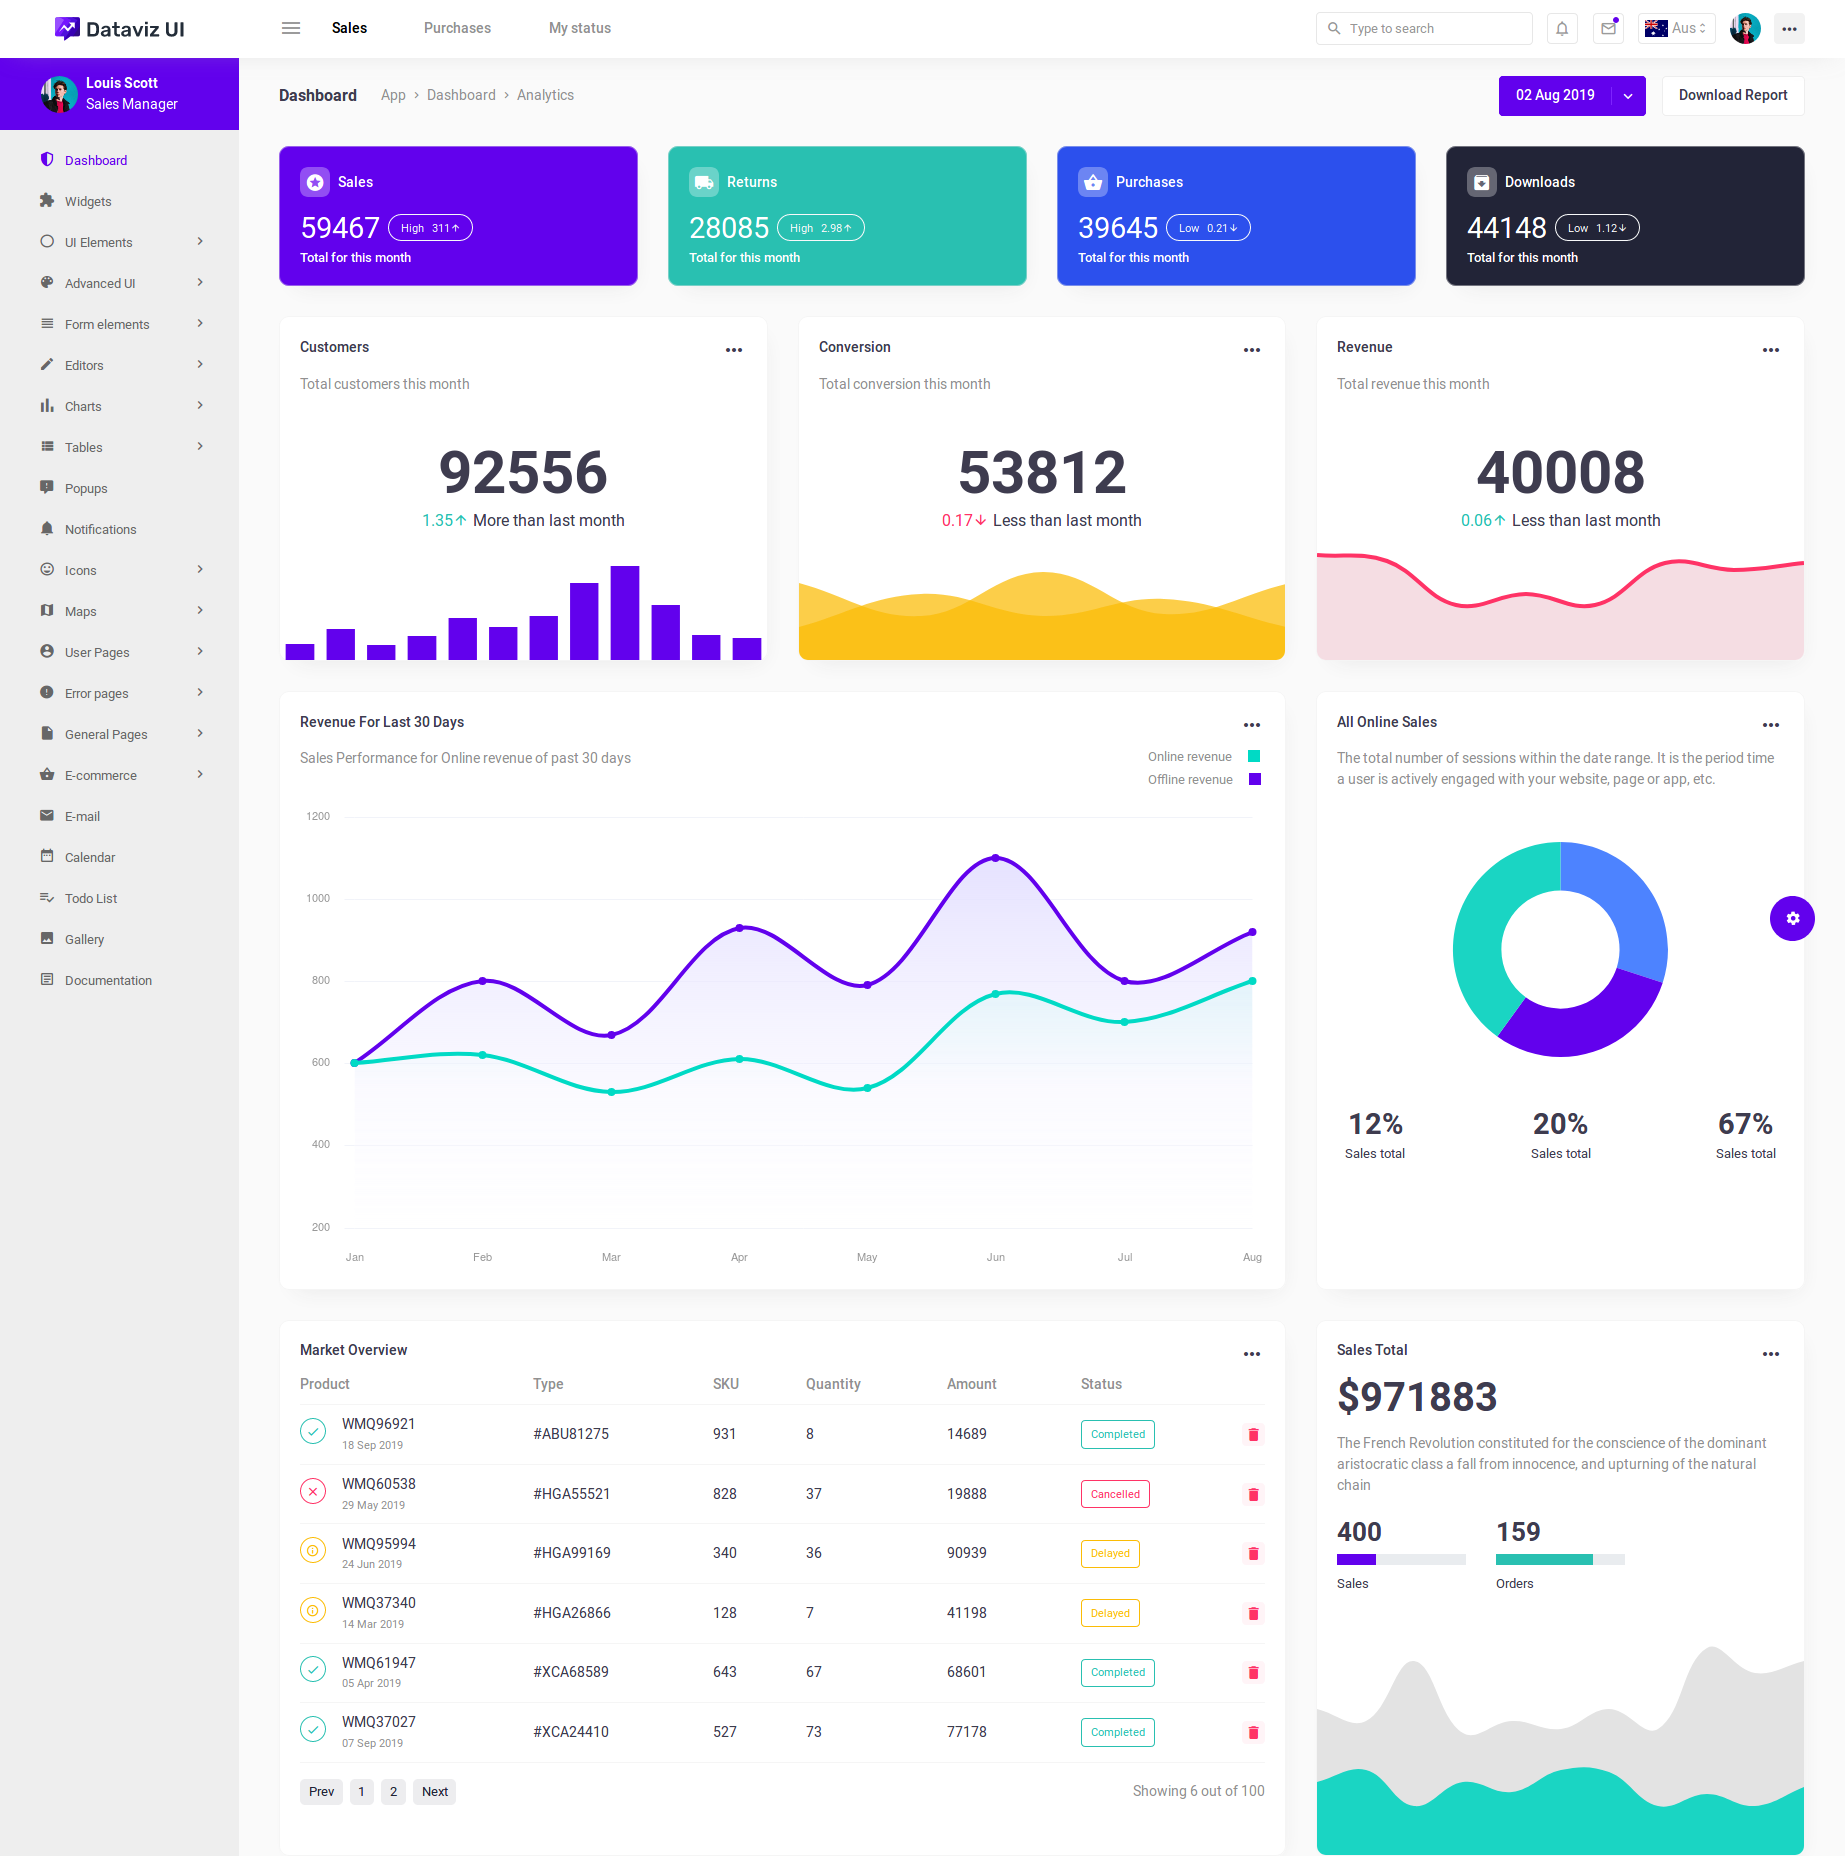 datavizui is one of the best bootstrap templates